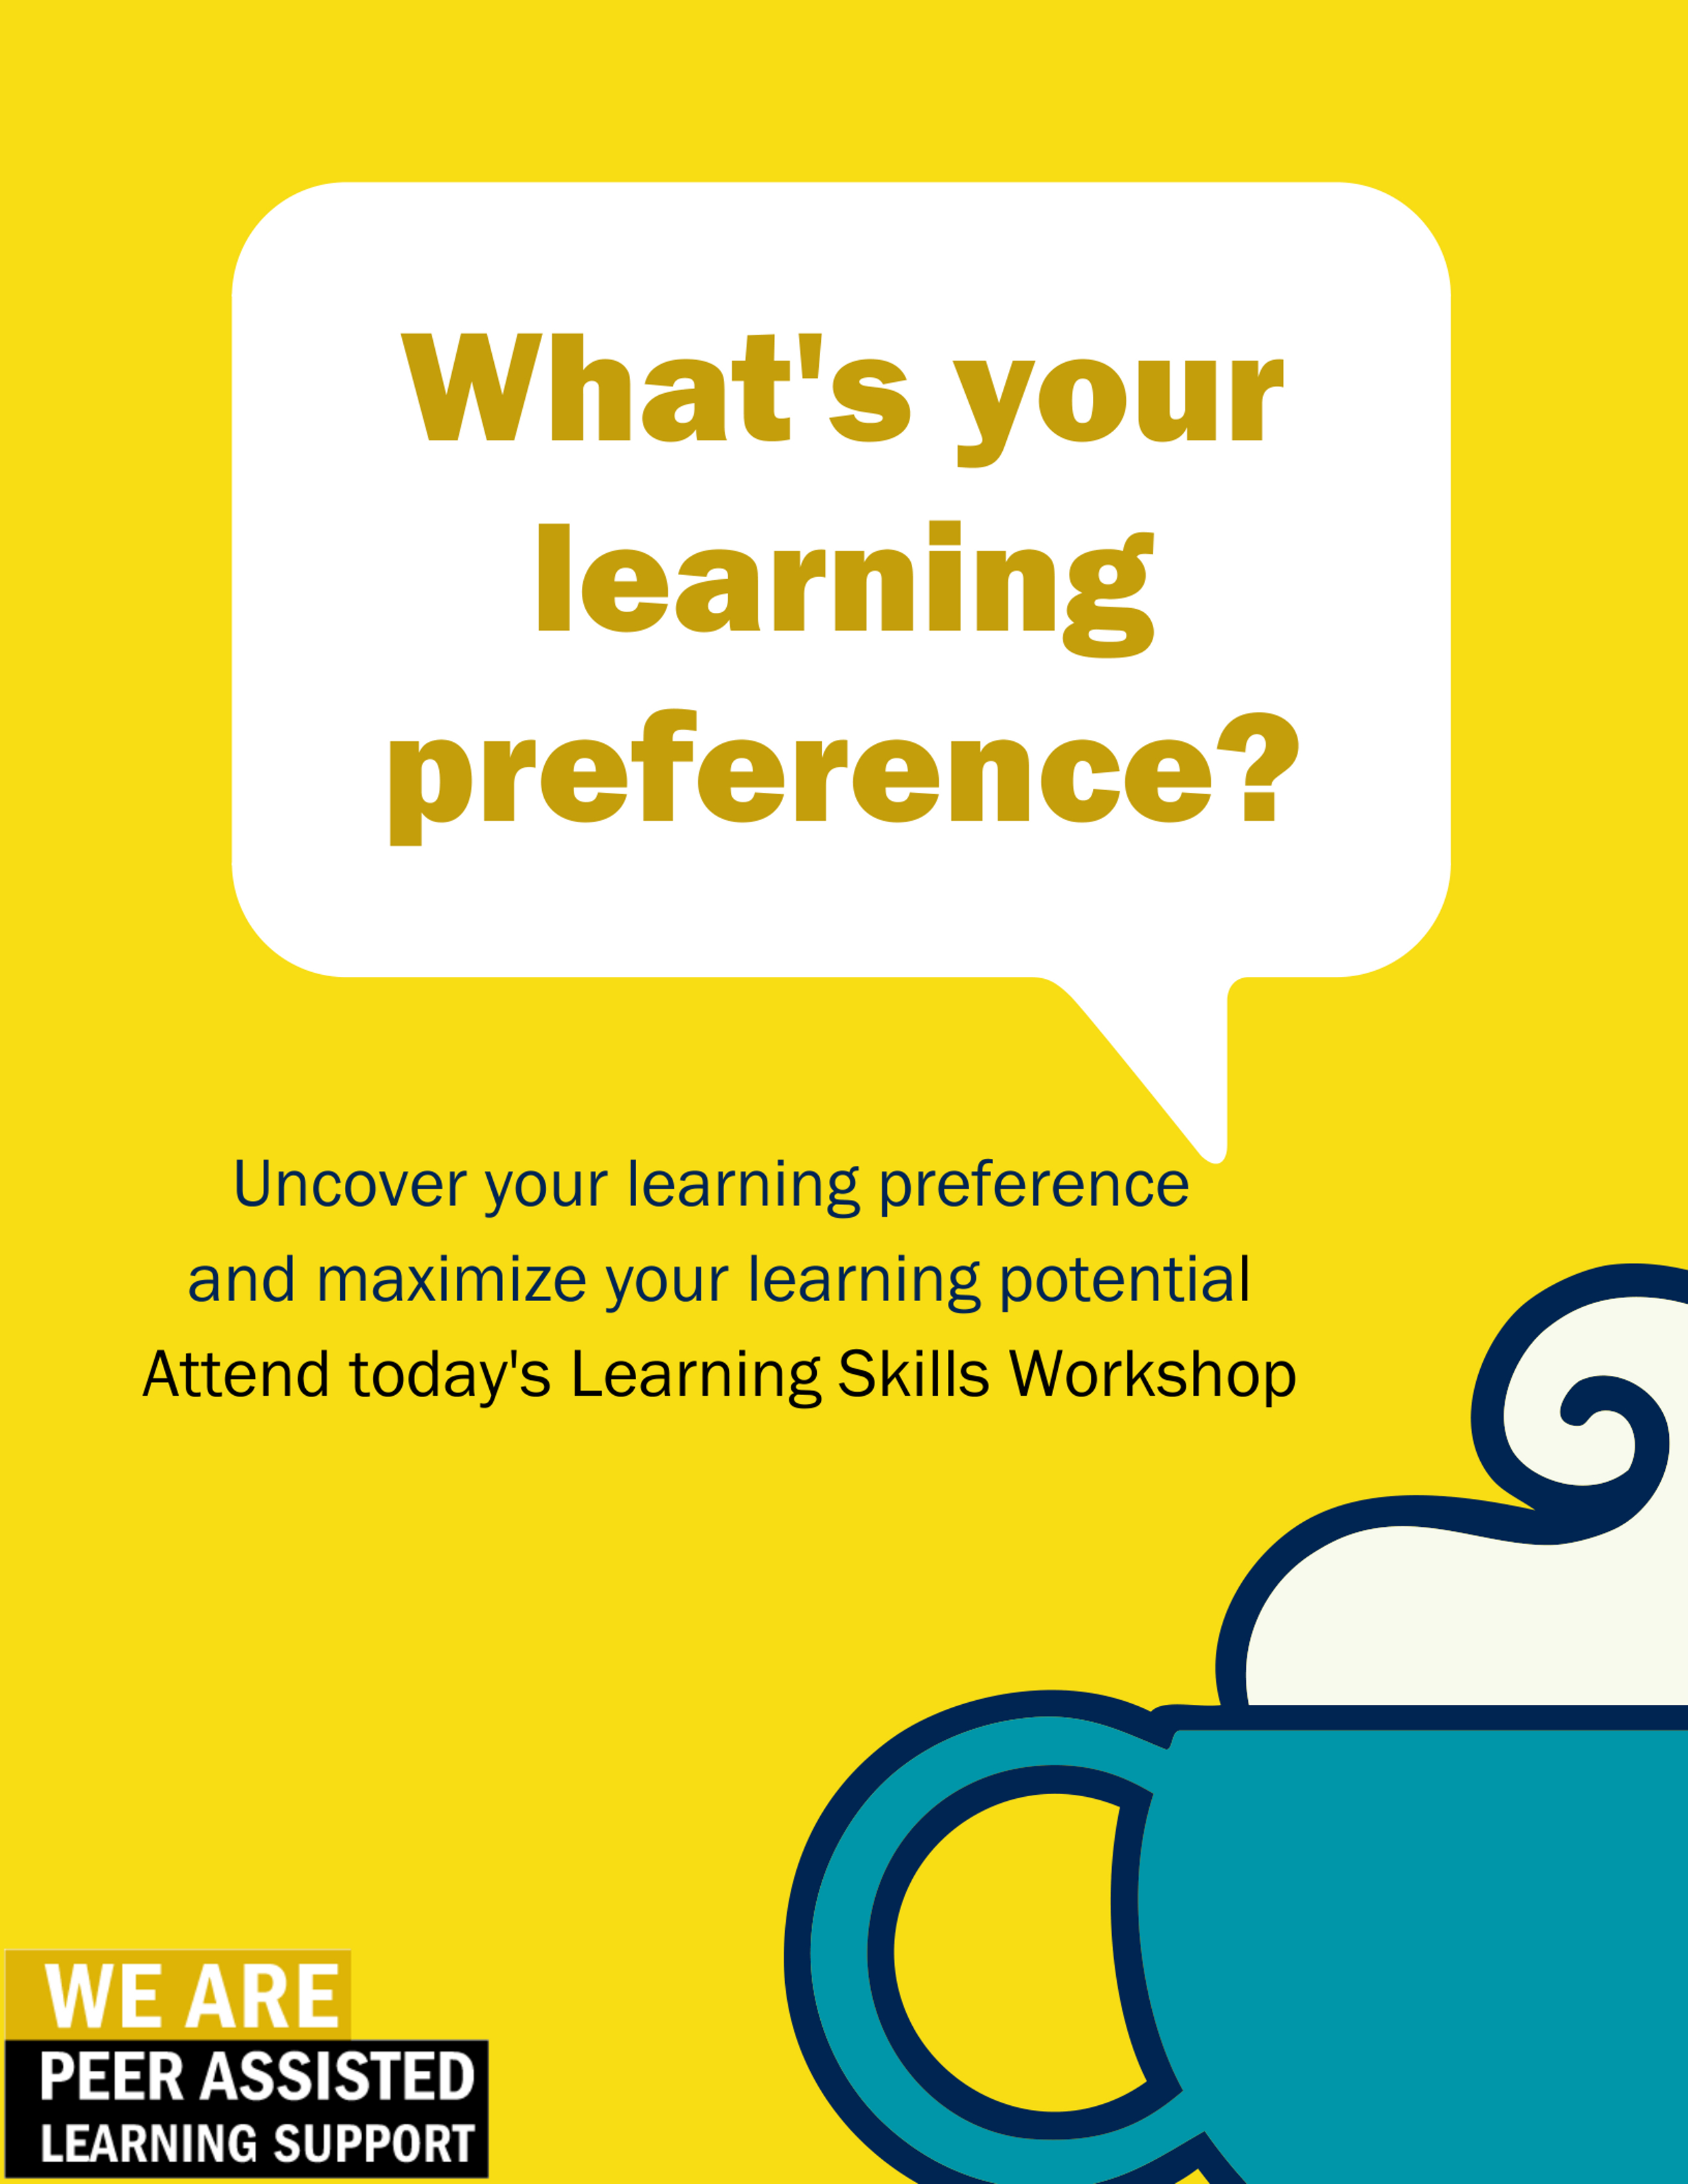 a cup of coffee on a bright yellow background. Background text says “What’s your learning preference? Uncover your learning pref